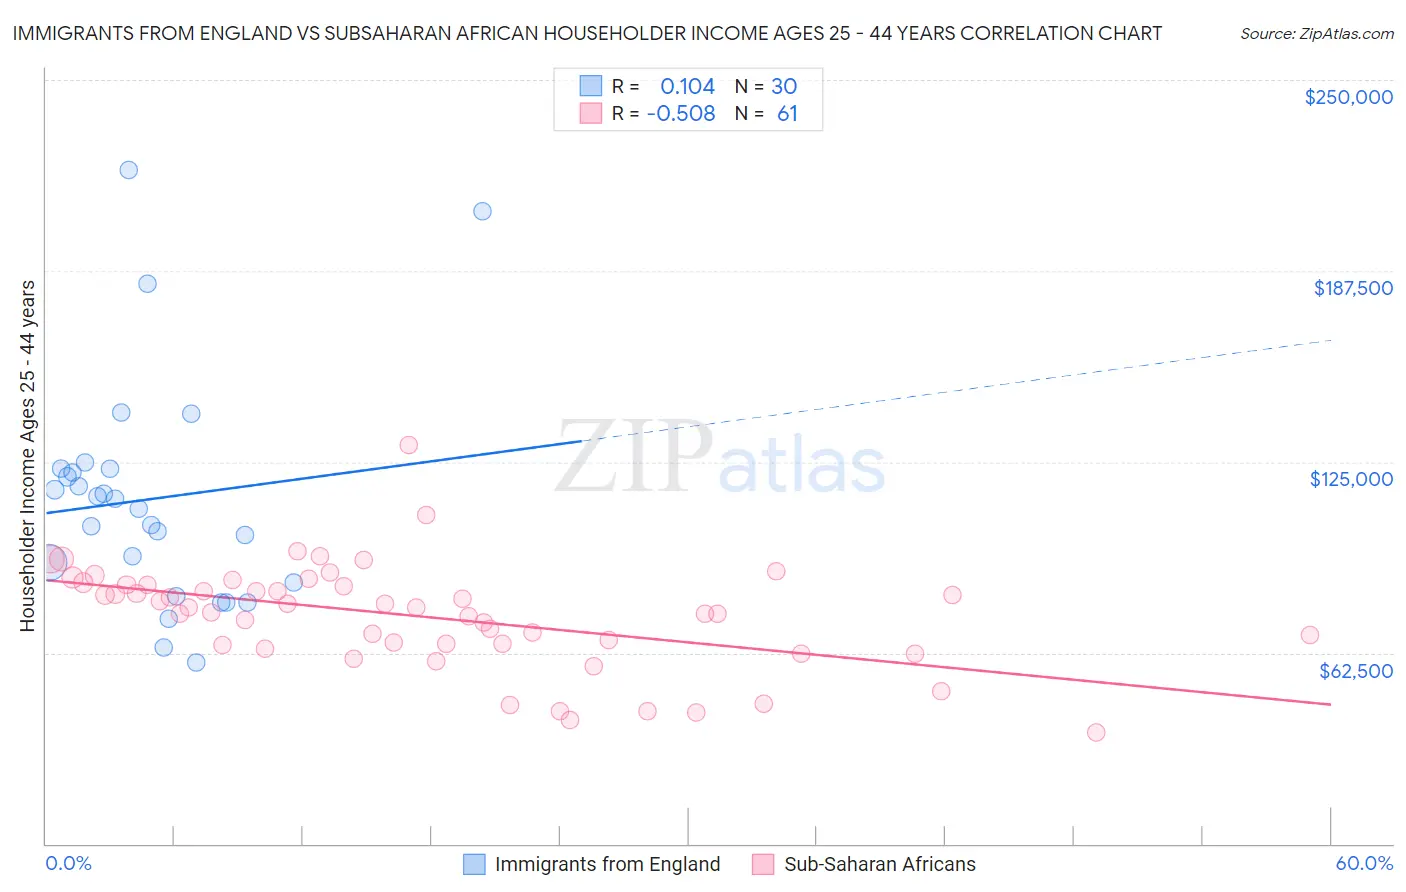 Immigrants from England vs Subsaharan African Householder Income Ages 25 - 44 years